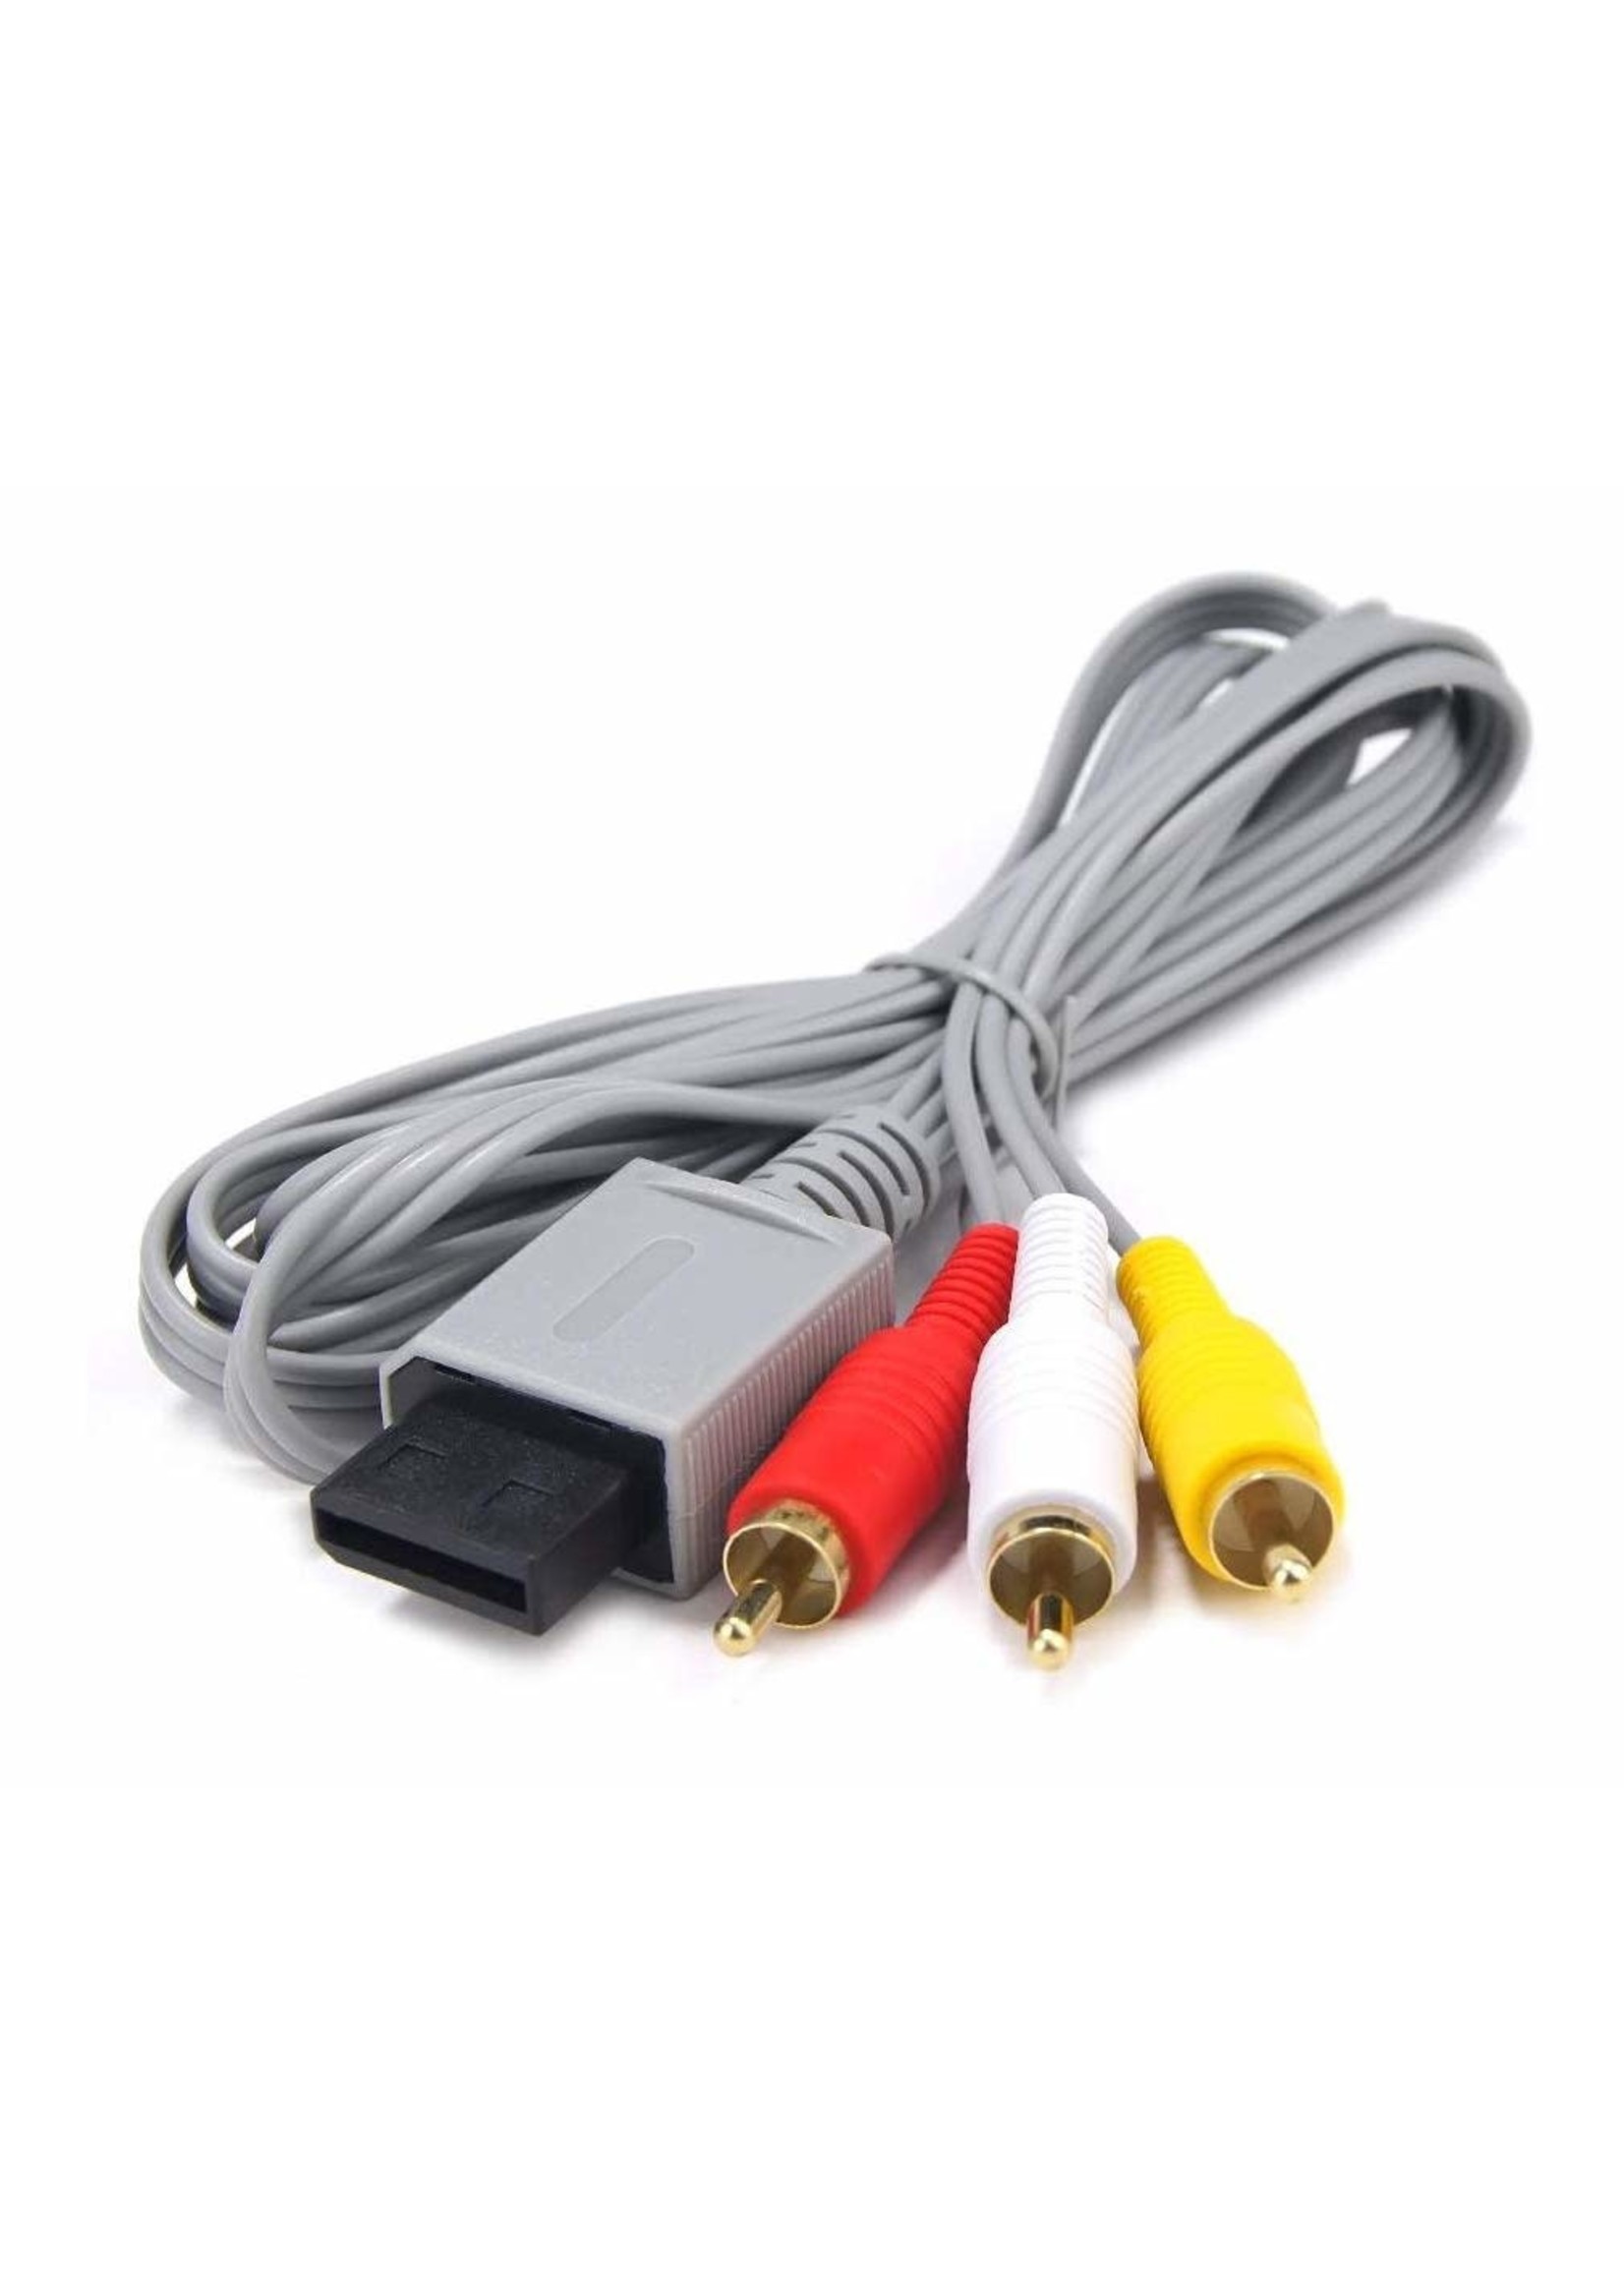 AV Cable for Wii Wii U, AV Cable Composite Retro Audio Video Standard Cord Compatible with Nintendo Wii Wii U